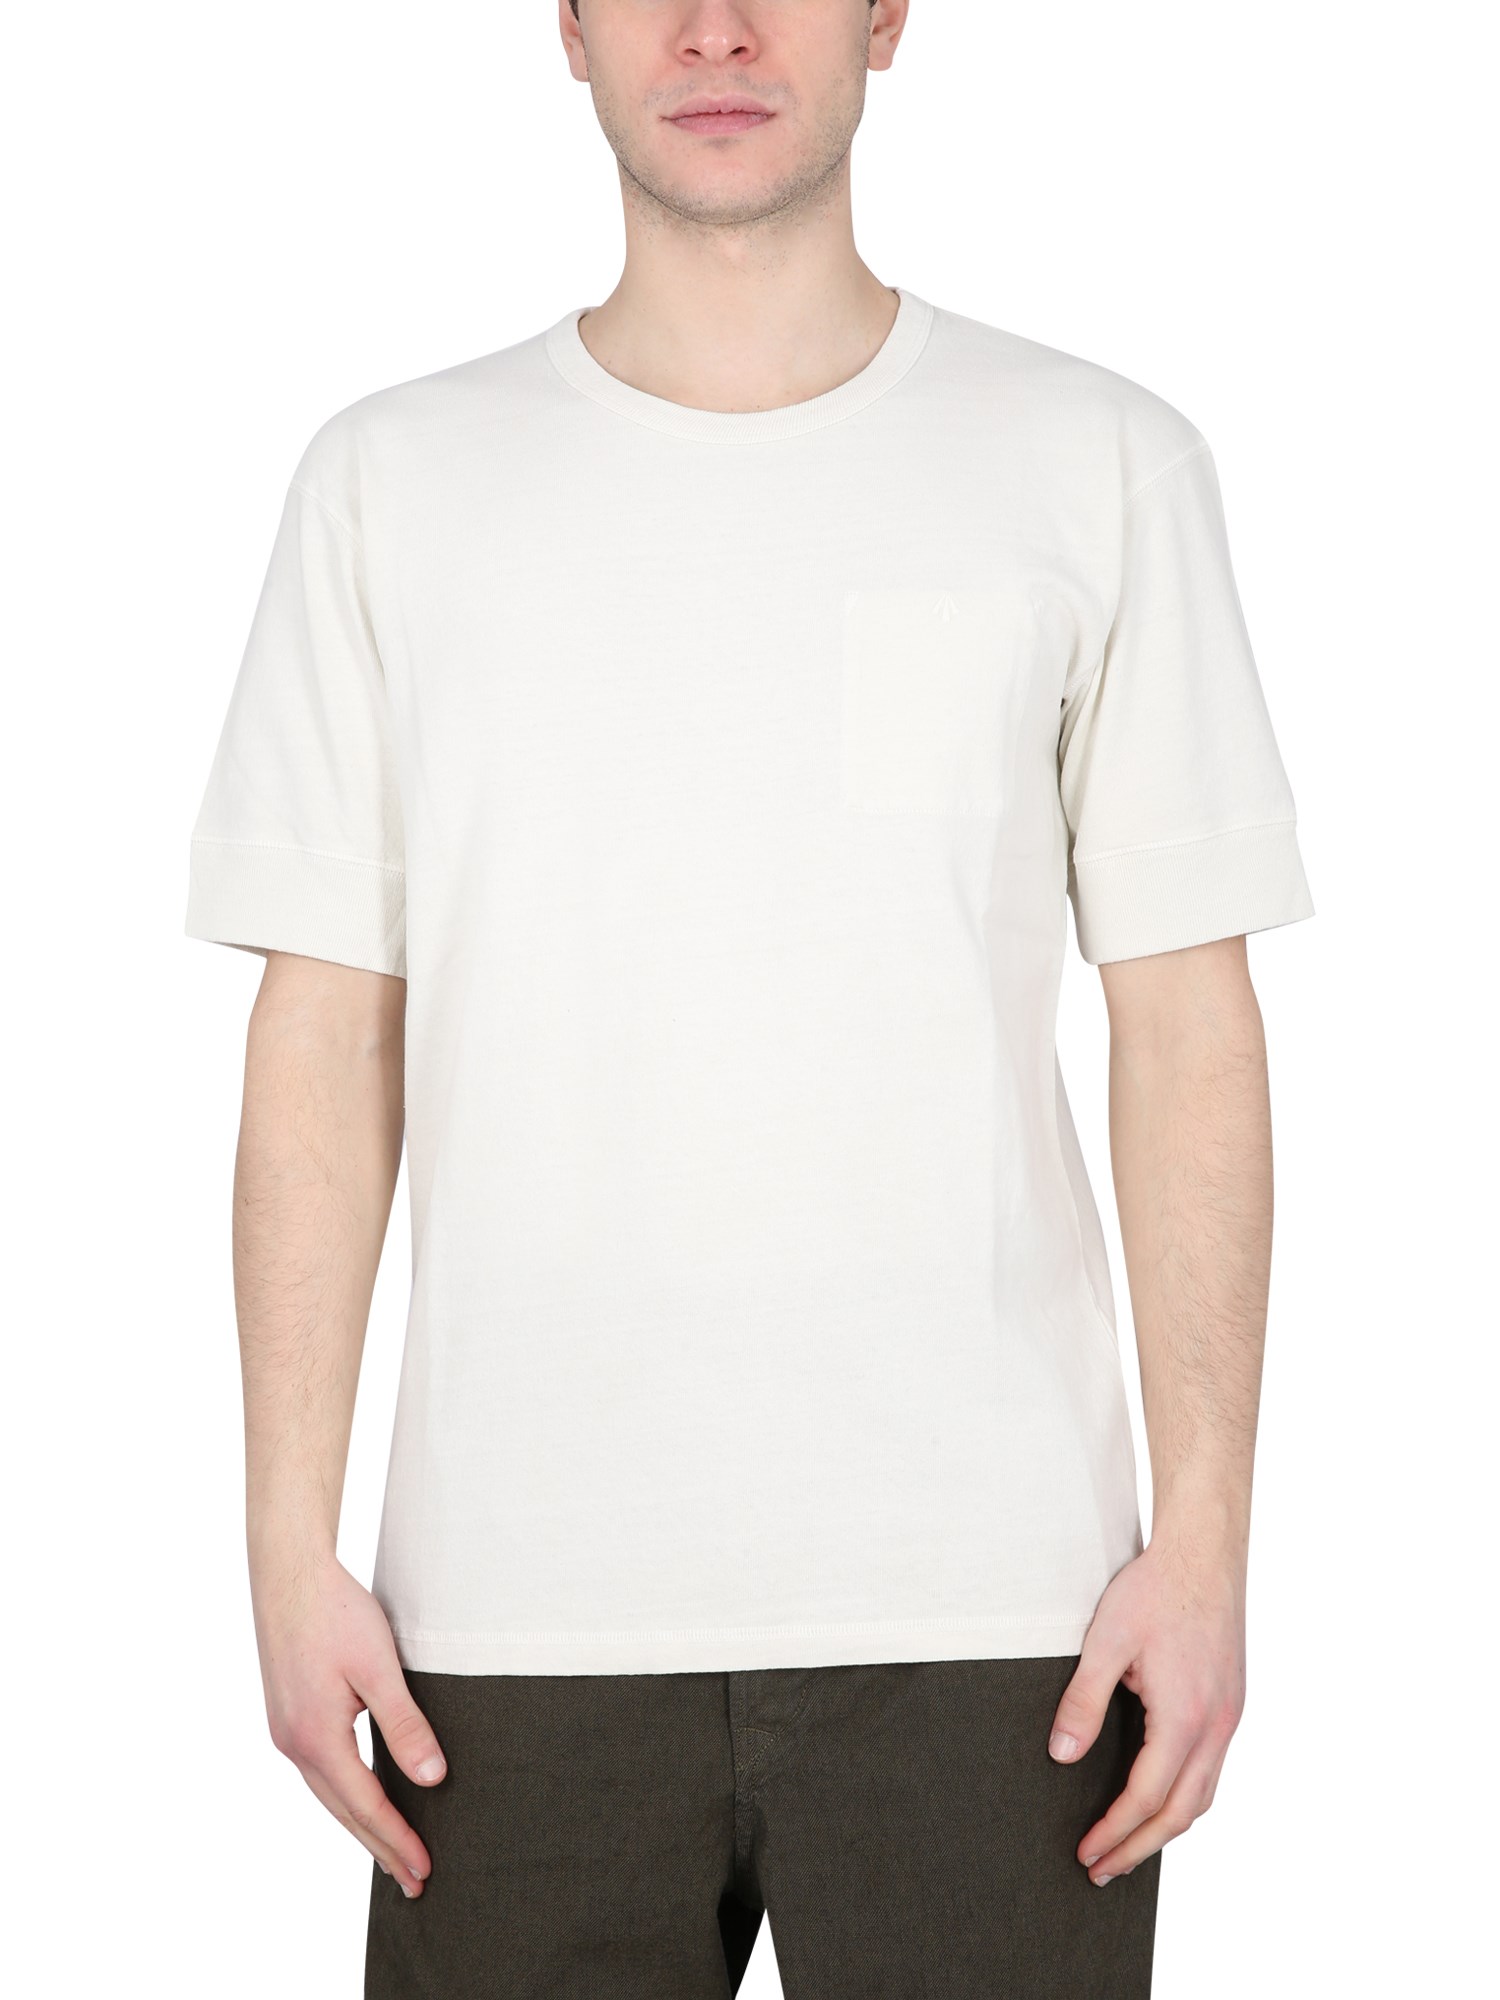 NIGEL CABOURN T-SHIRT WITH LOGO